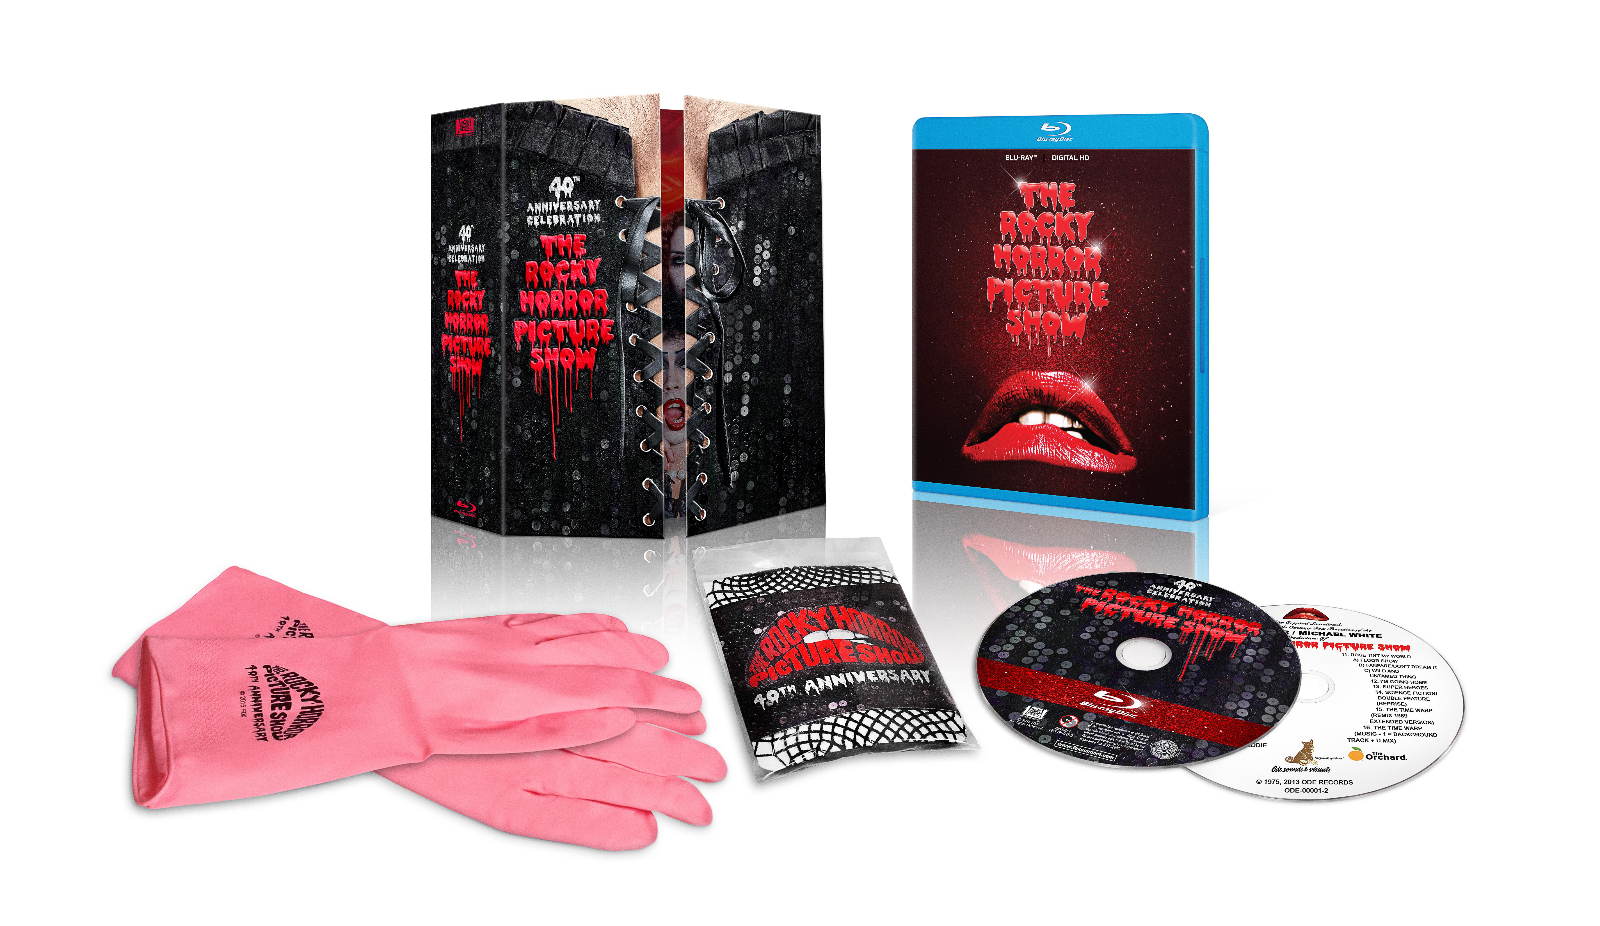 The Rocky Horror Picture Show 40th Anniversary Blu-Ray! Special Features! Alternate Ending! Outtakes! The Soundtrack! And More!